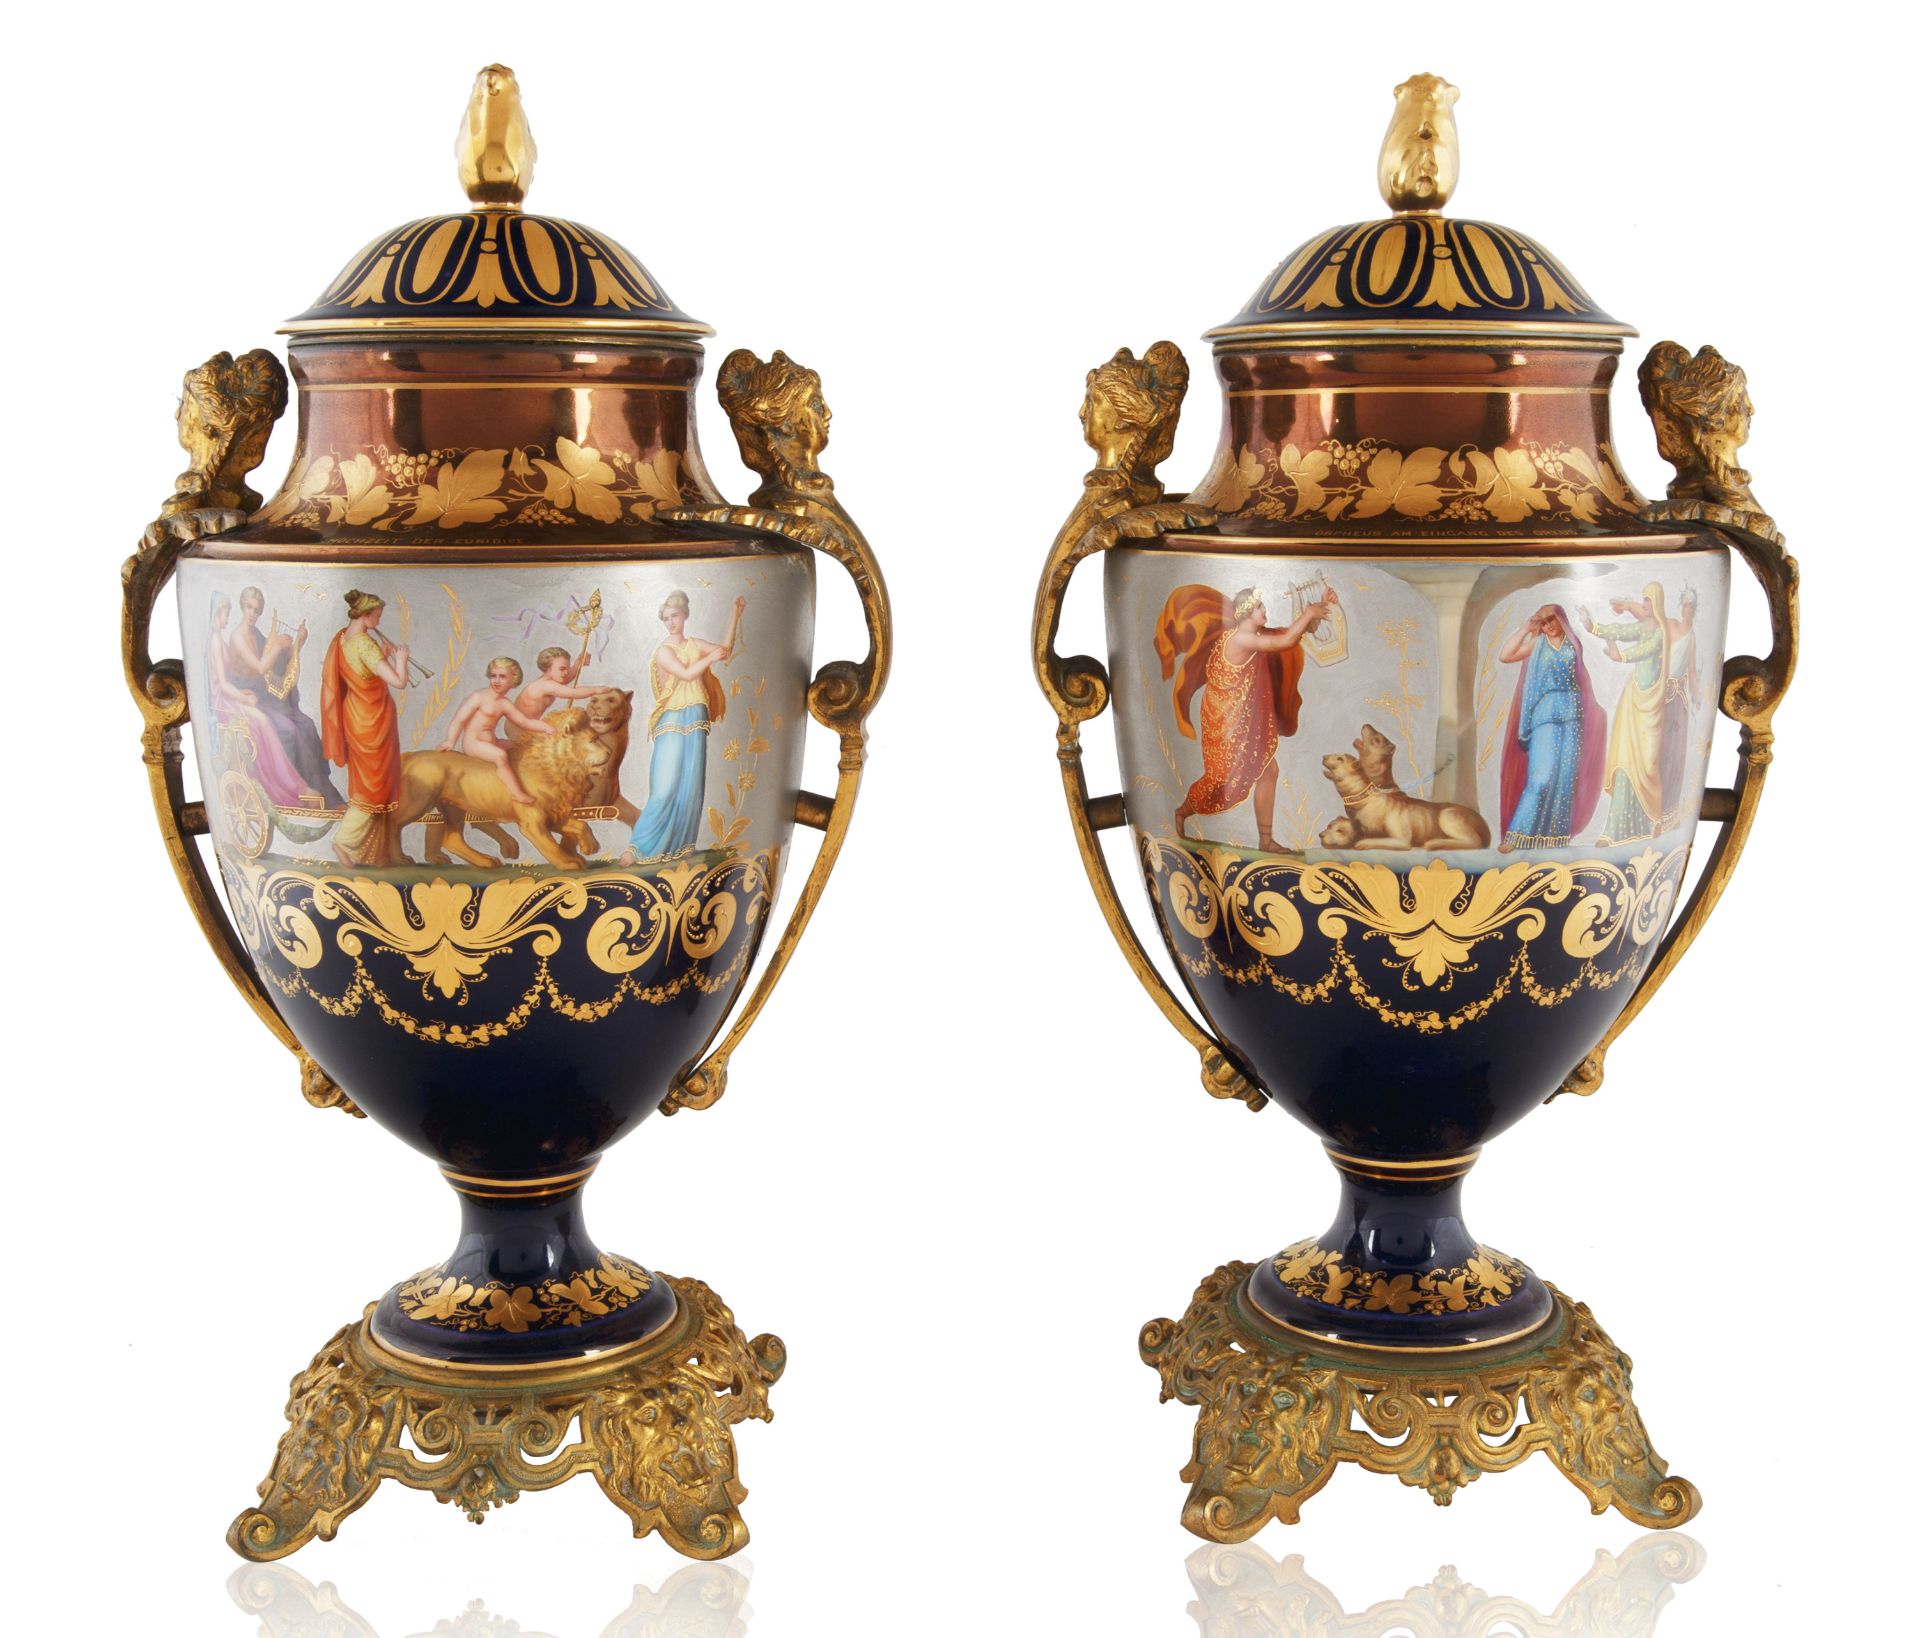 20TH CENTURY ROYAL-VIENNA STYLE PORCELAIN URNS - Image 2 of 5